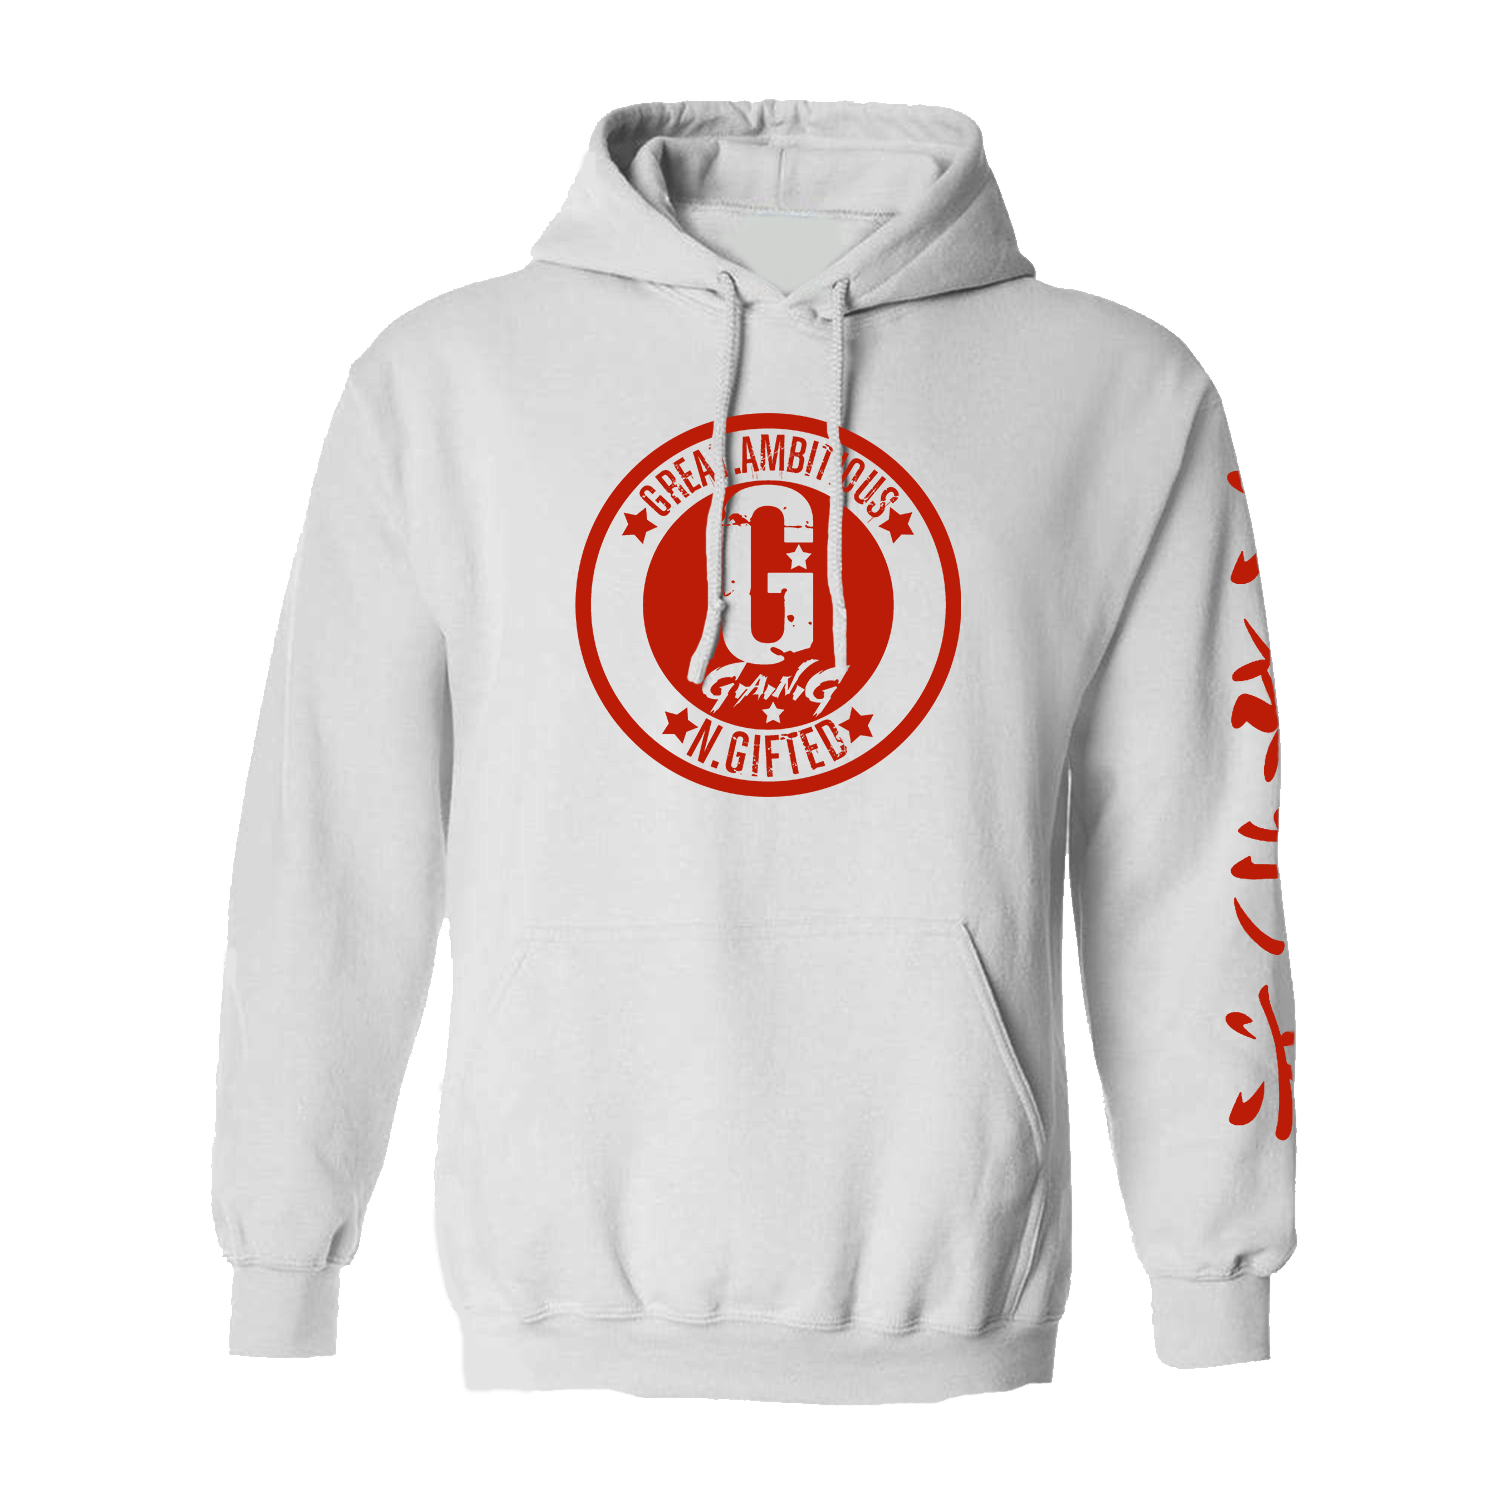 Chinnese Letters with Red White Logo - WHITE & RED CHINESE HOODIE. Go Hard Gang